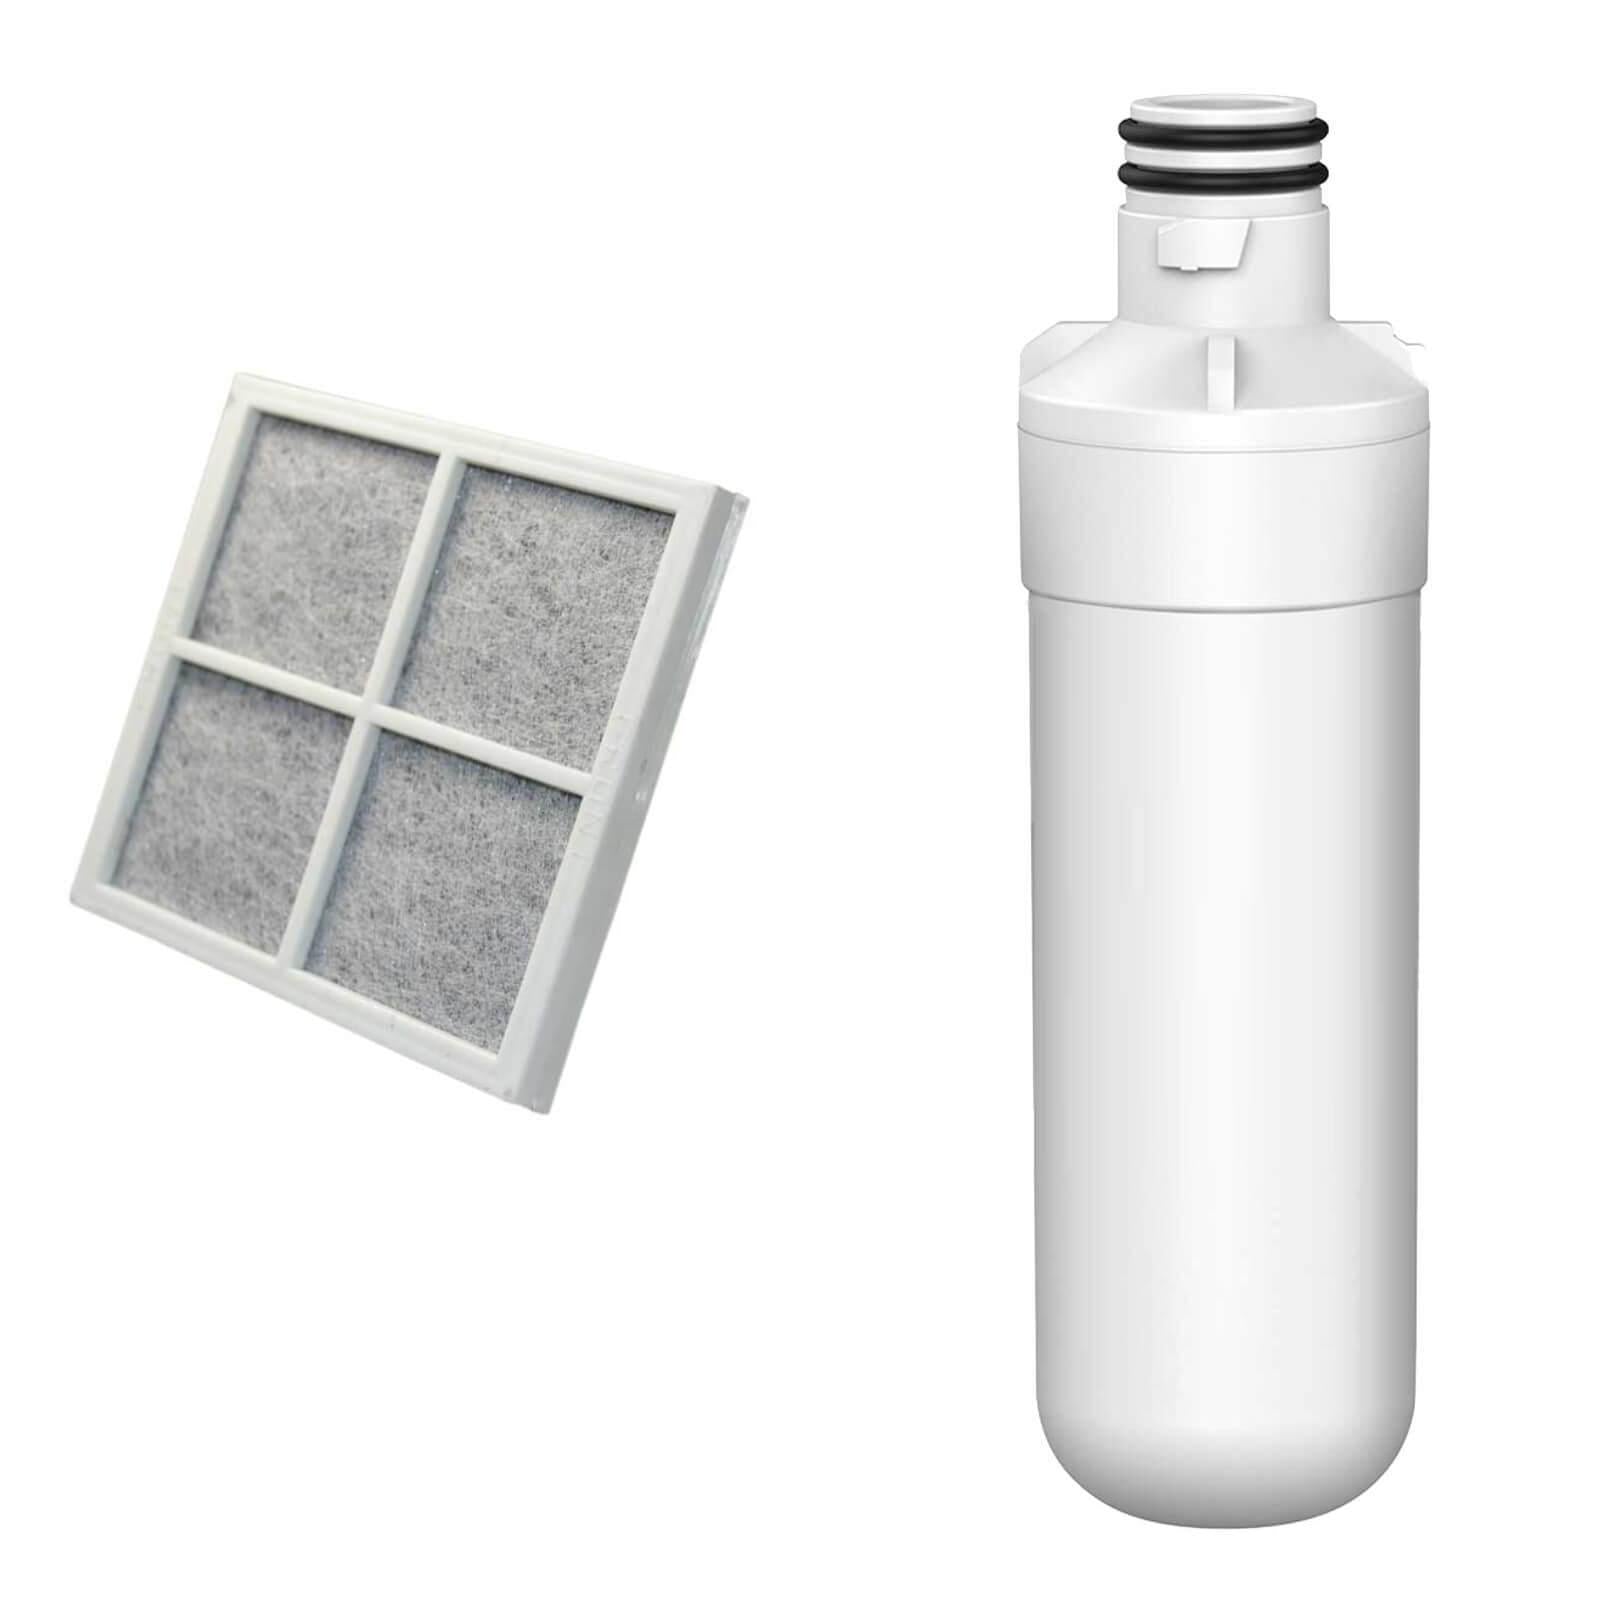 Water Filter Compatible For LG LT1000P ADQ747935 MDJ64844601 with Air Filters Sparesbarn